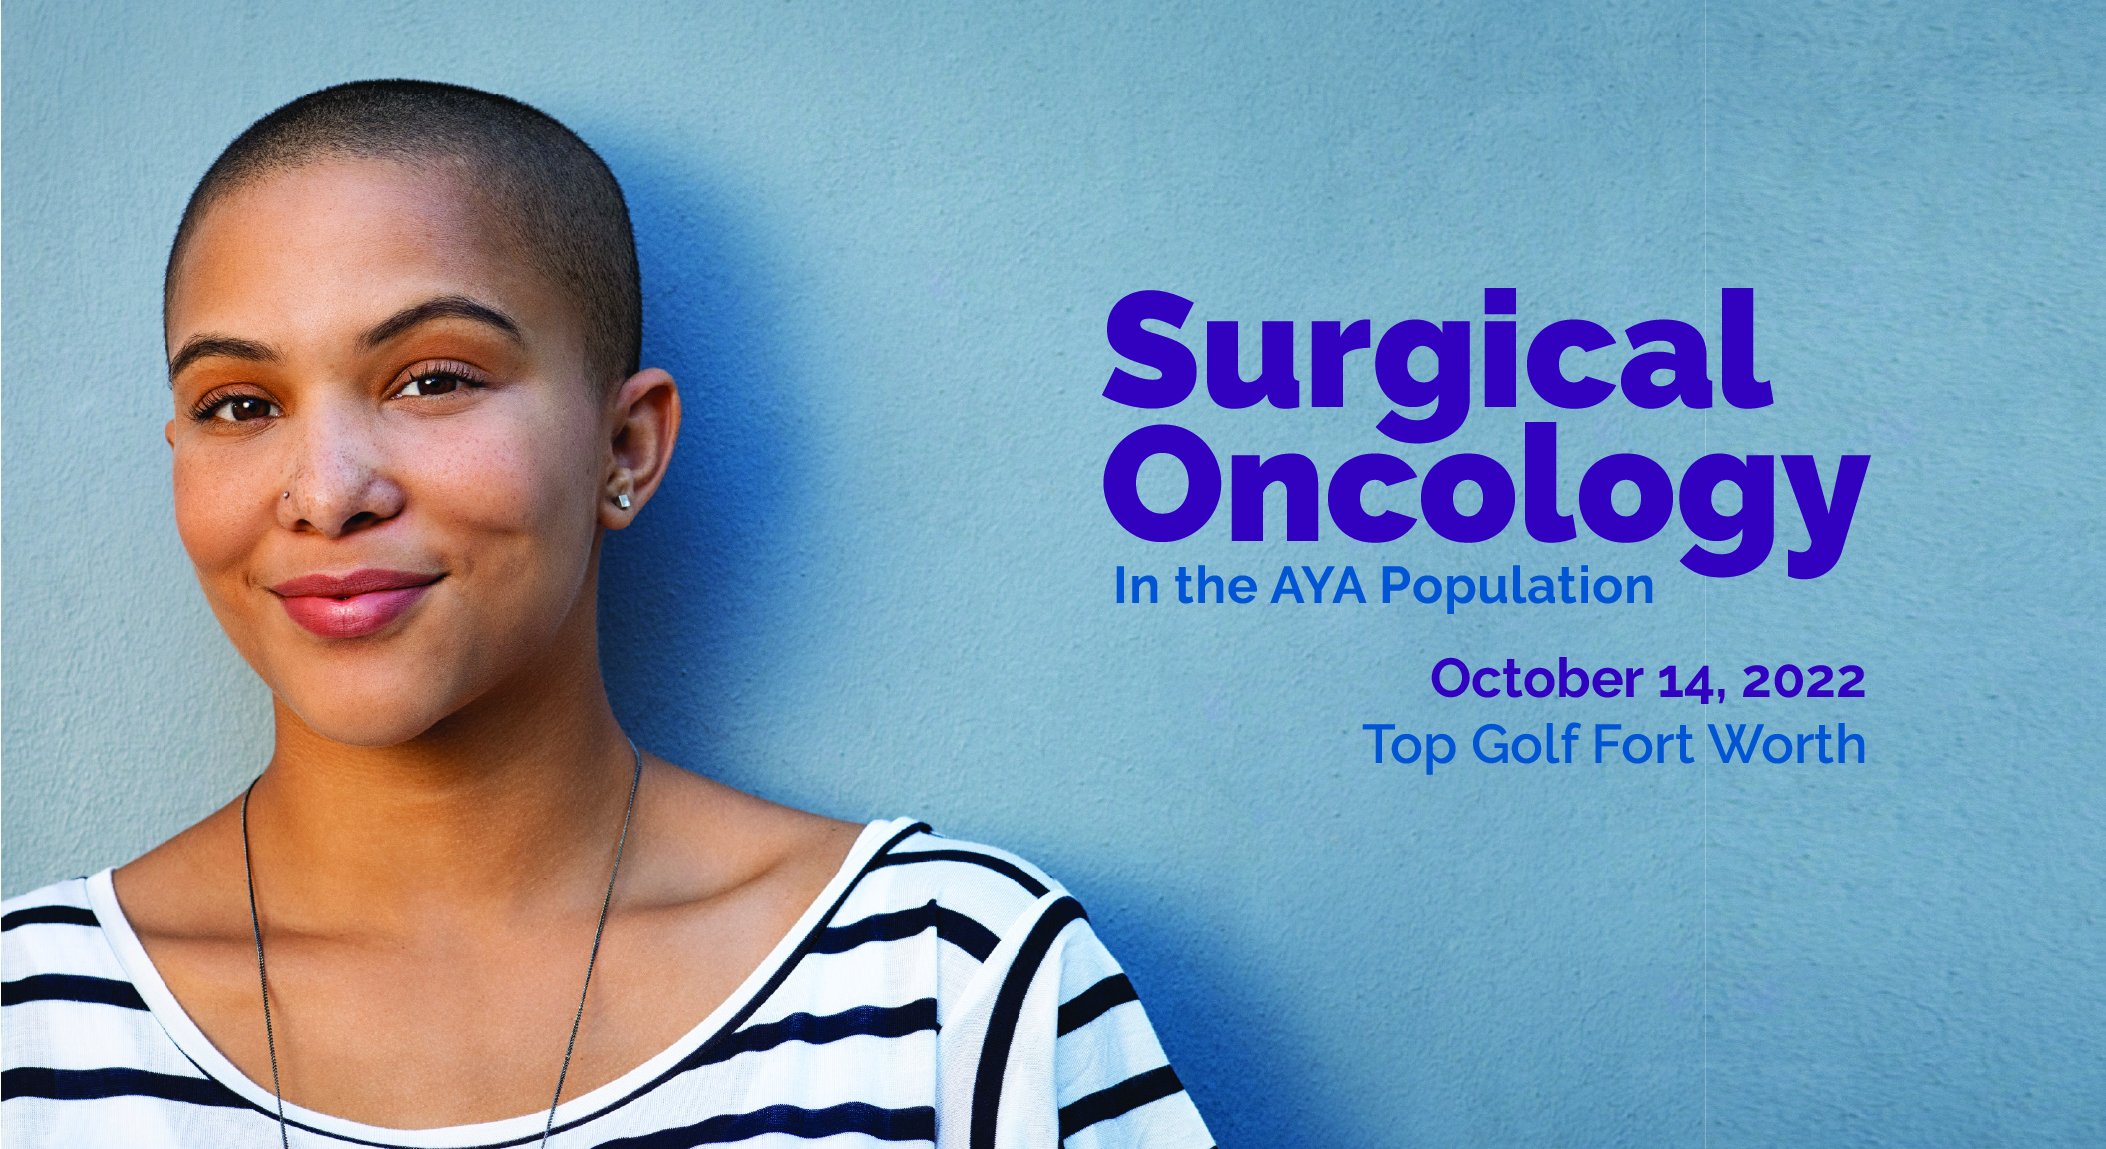 Surgical Oncology in the AYA Population